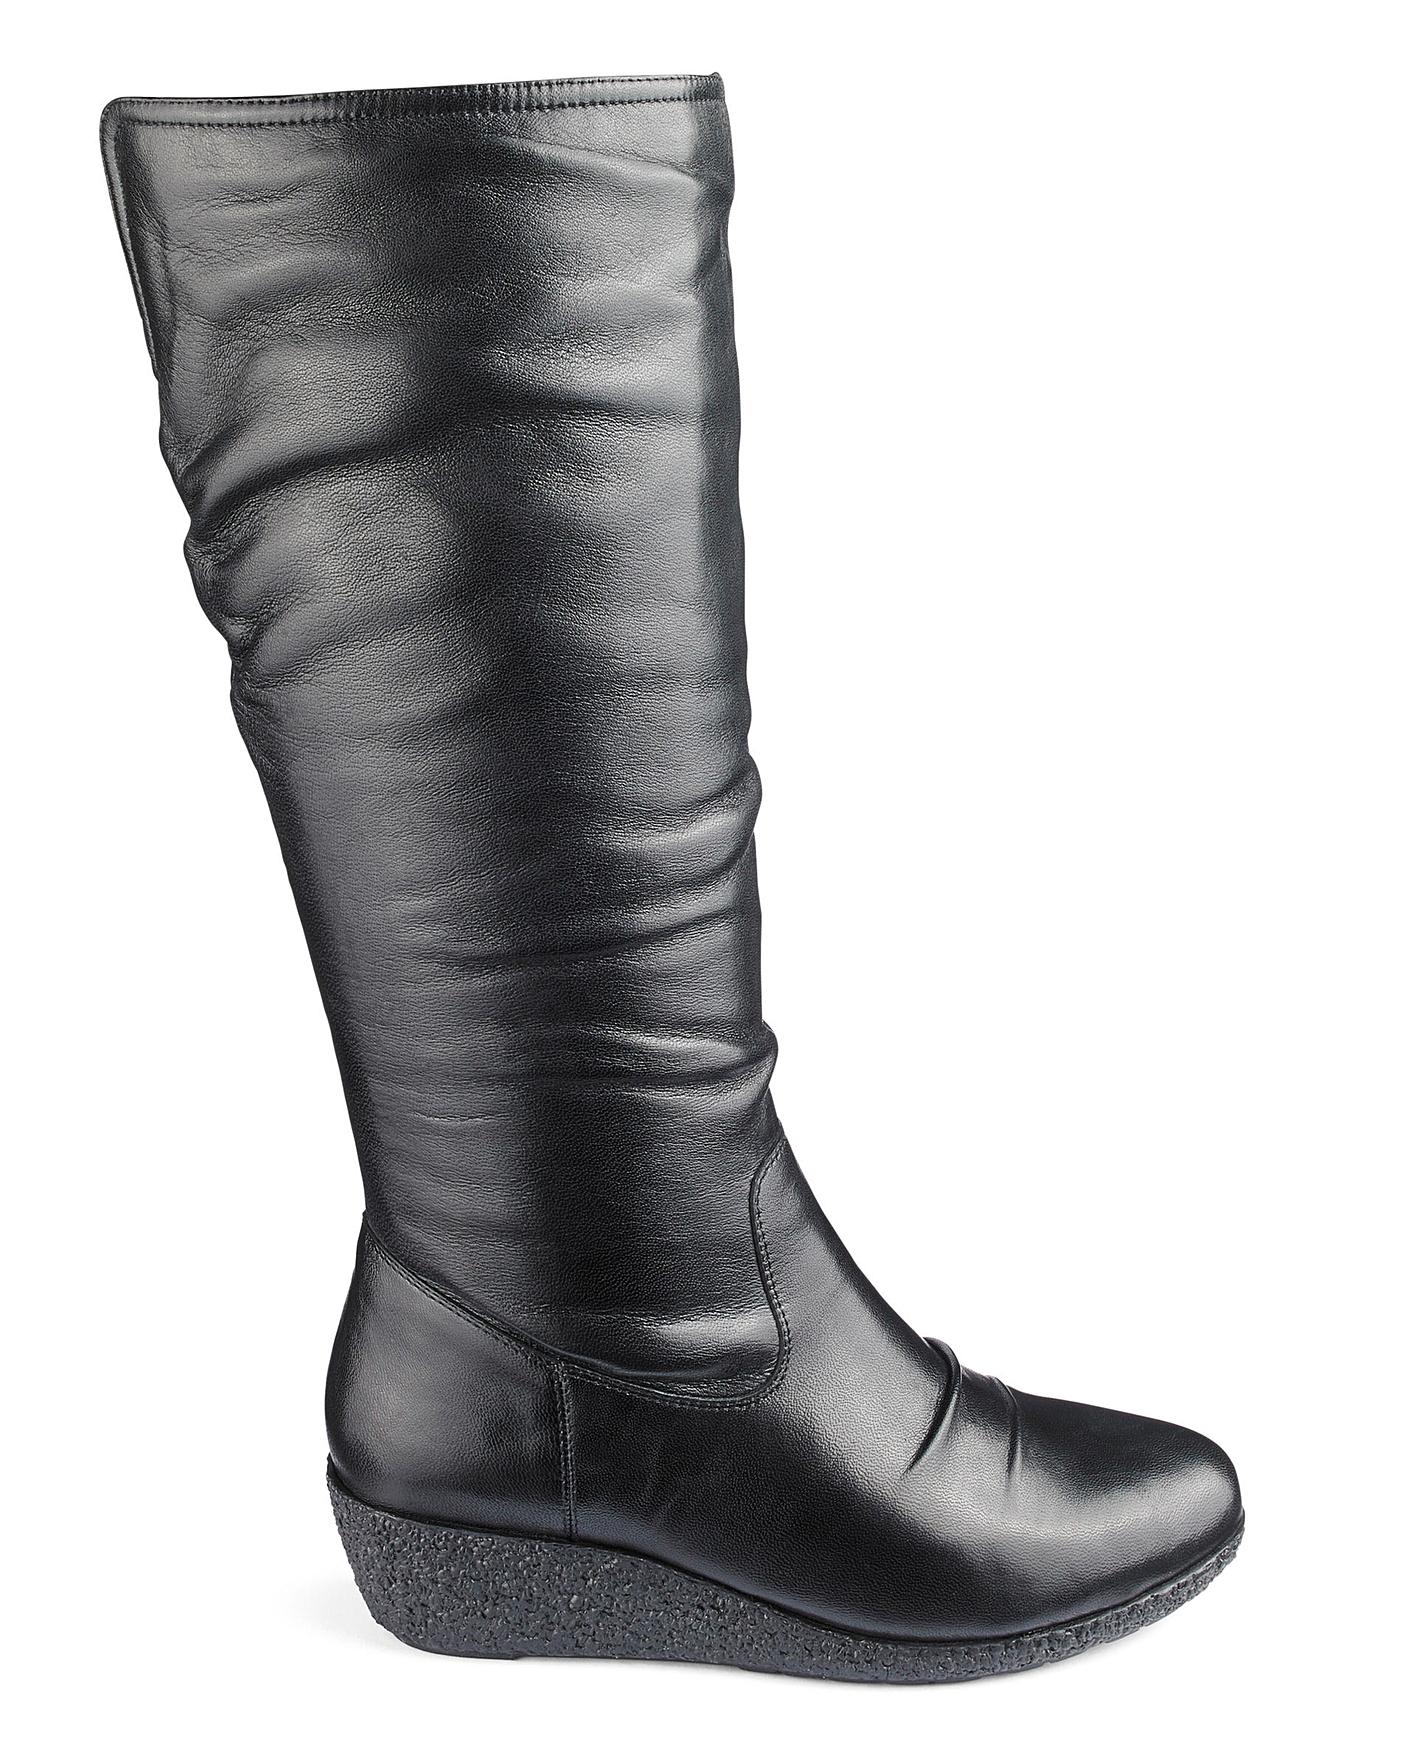 Leather Wedge Boots E Fit Standard Calf 